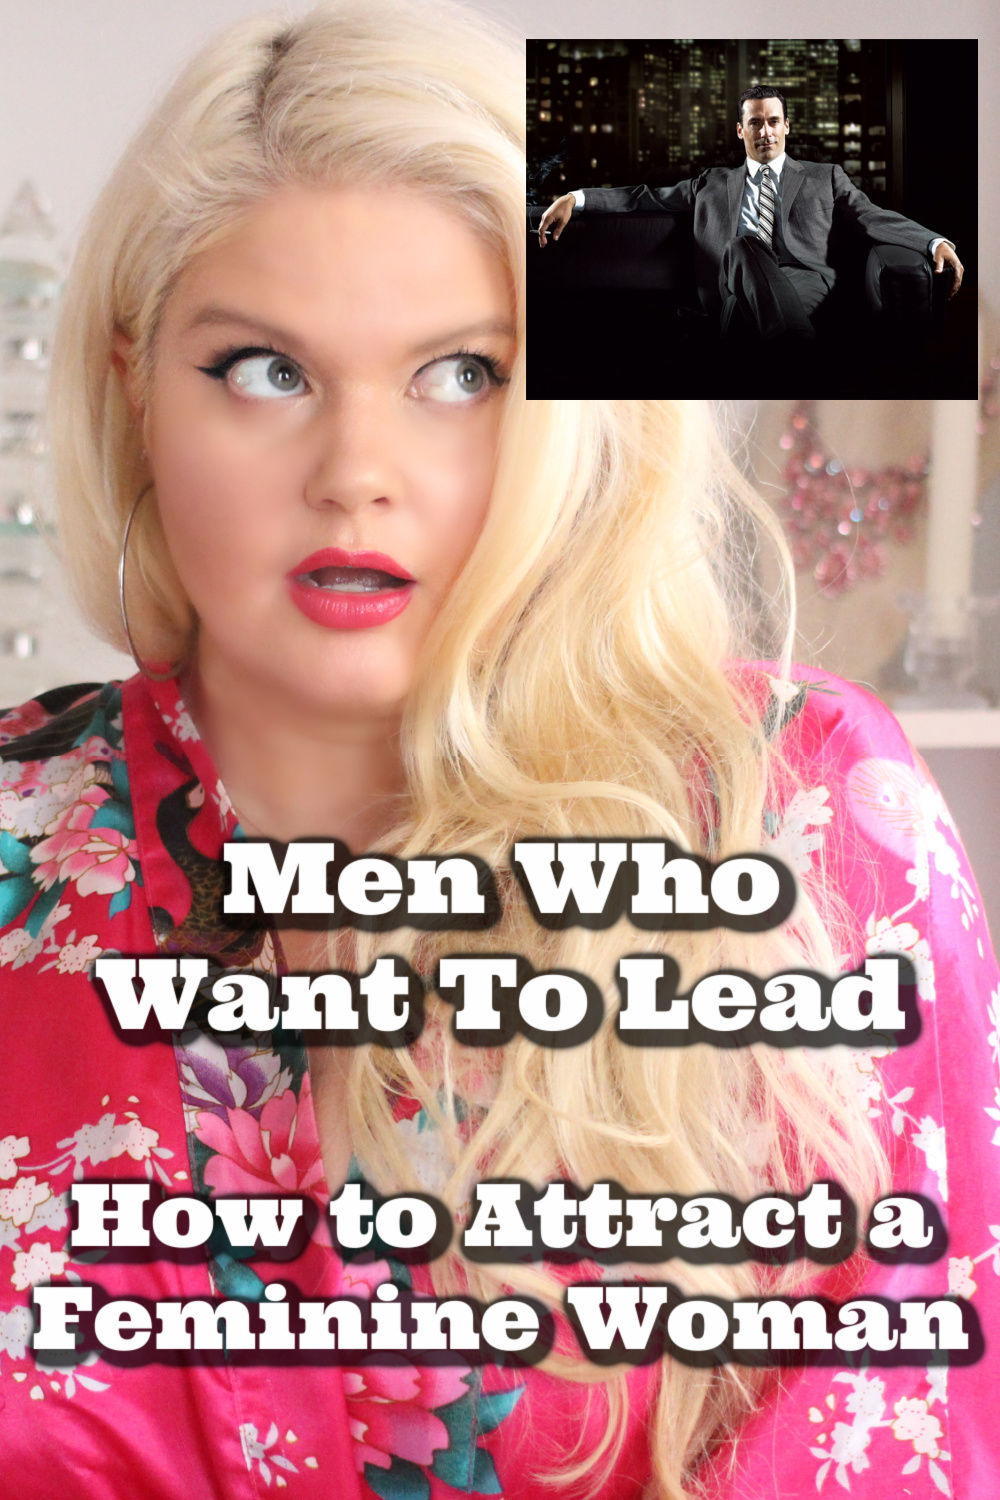 men who want to lead, should men lean back, should men lean back and let a woman pursue, how men attract a feminine partner, should men pursue women, can girls ask guys out, how to attract a feminine woman, how to create polarity in relationships, should girls ask guys out, wounded feminine energy, wounded masculine energy in a woman, should women pursue men, dating advice for men, dating advice for women, passive men, understanding masculine and feminine energy, understanding masculine and feminine energy beginners guide, feminine and masculine energy in relationships, difference between feminine and masculine energy, divine masculine and feminine healing energy, feminine energy, feminine and masculine energy balance, feminine and masculine energy traits, feminine masculine energy, feminine energy vs masculine energy, masculine energy, masculine energy vs feminine energy, masculine vs feminine, Everyday starlet, sarah blodgett,